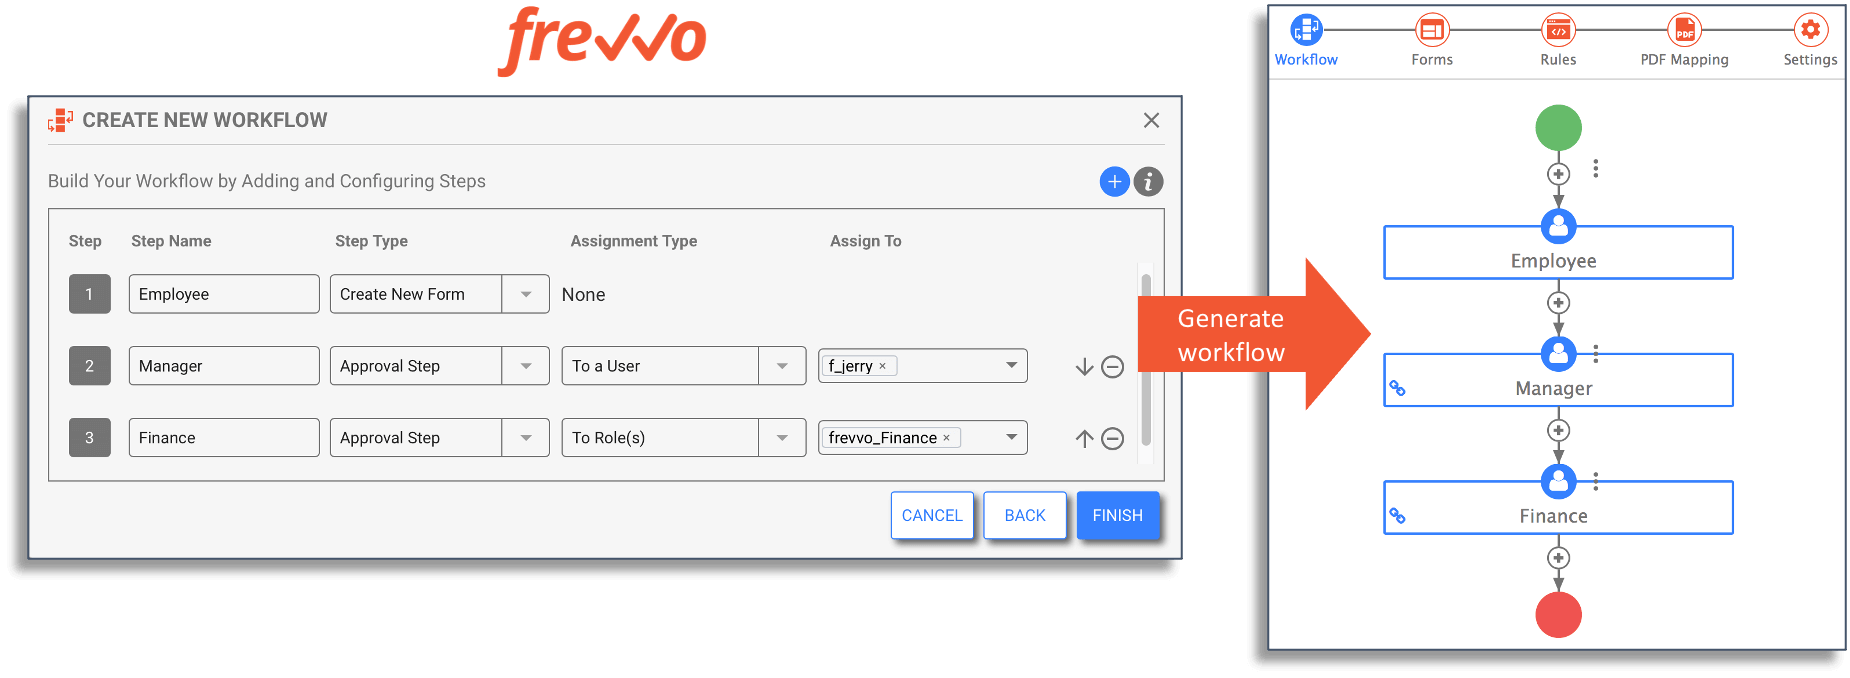 Using frevvo's Workflow Wizard to create an automated workflow